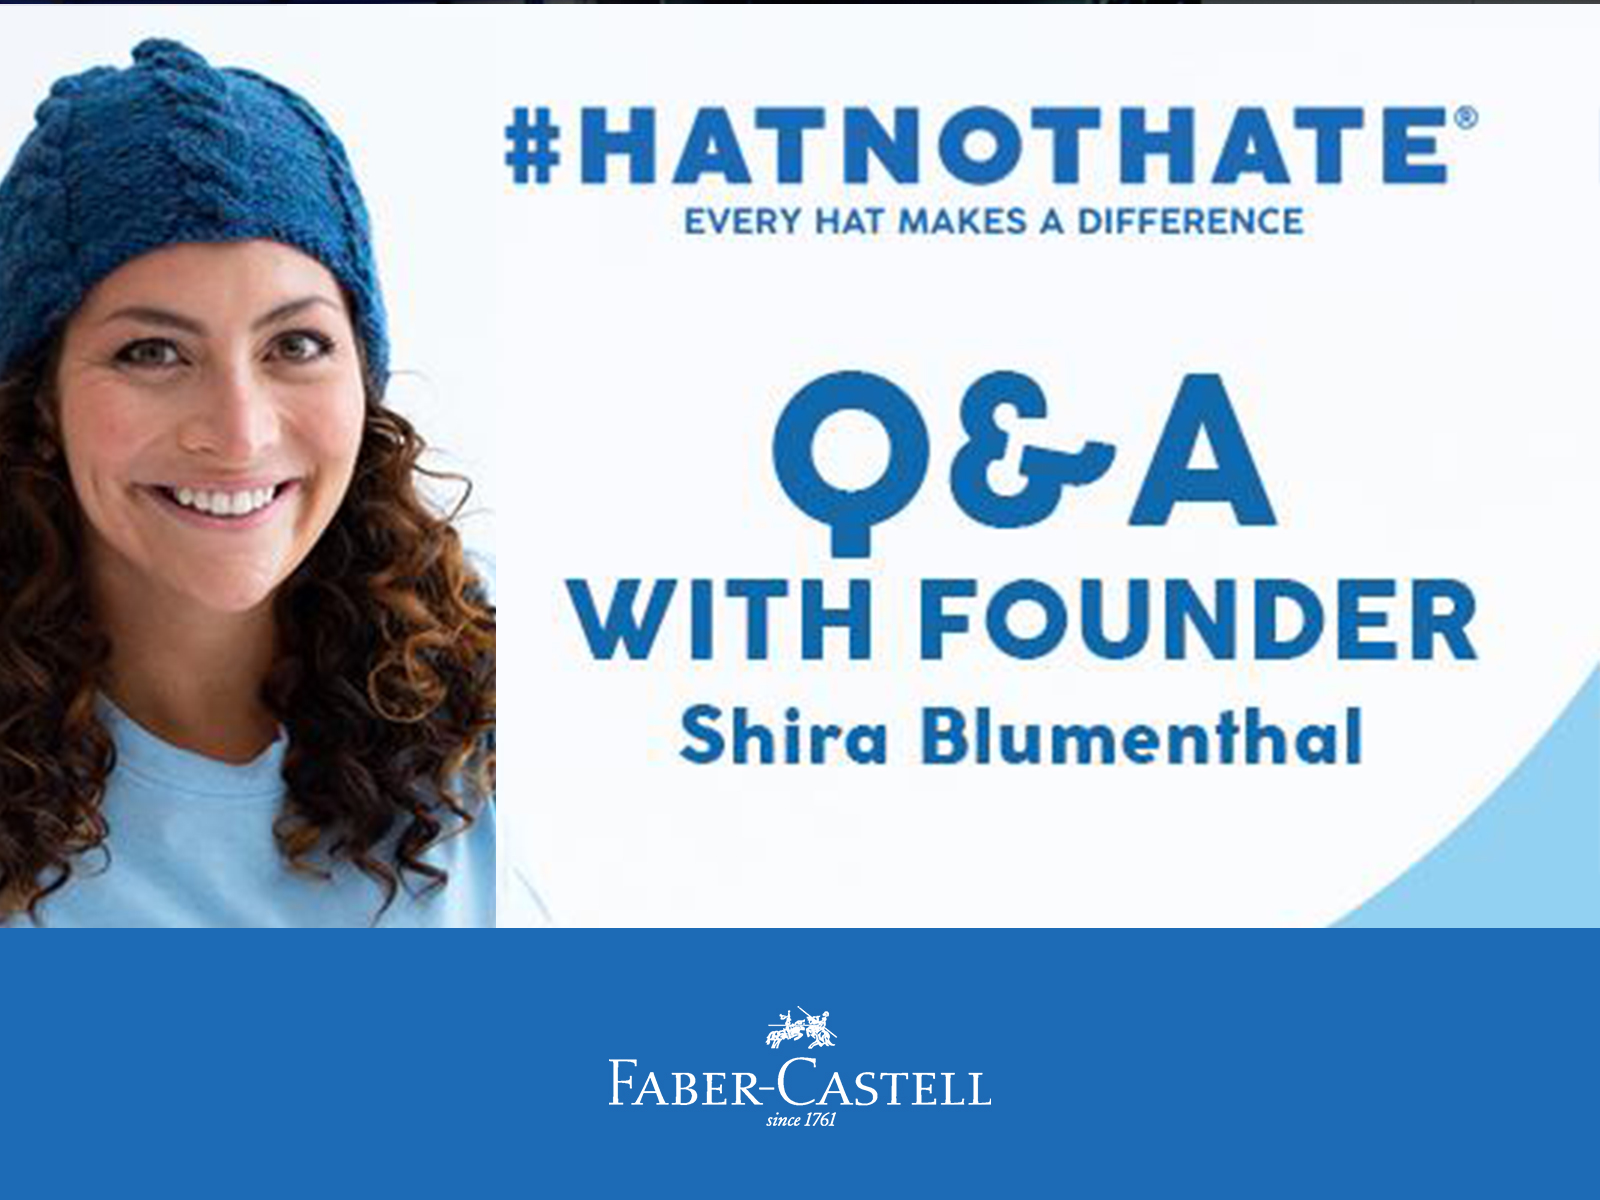 Title Graphic: Q&A with Founder Shira Blumenthal, with Faber Castell logo